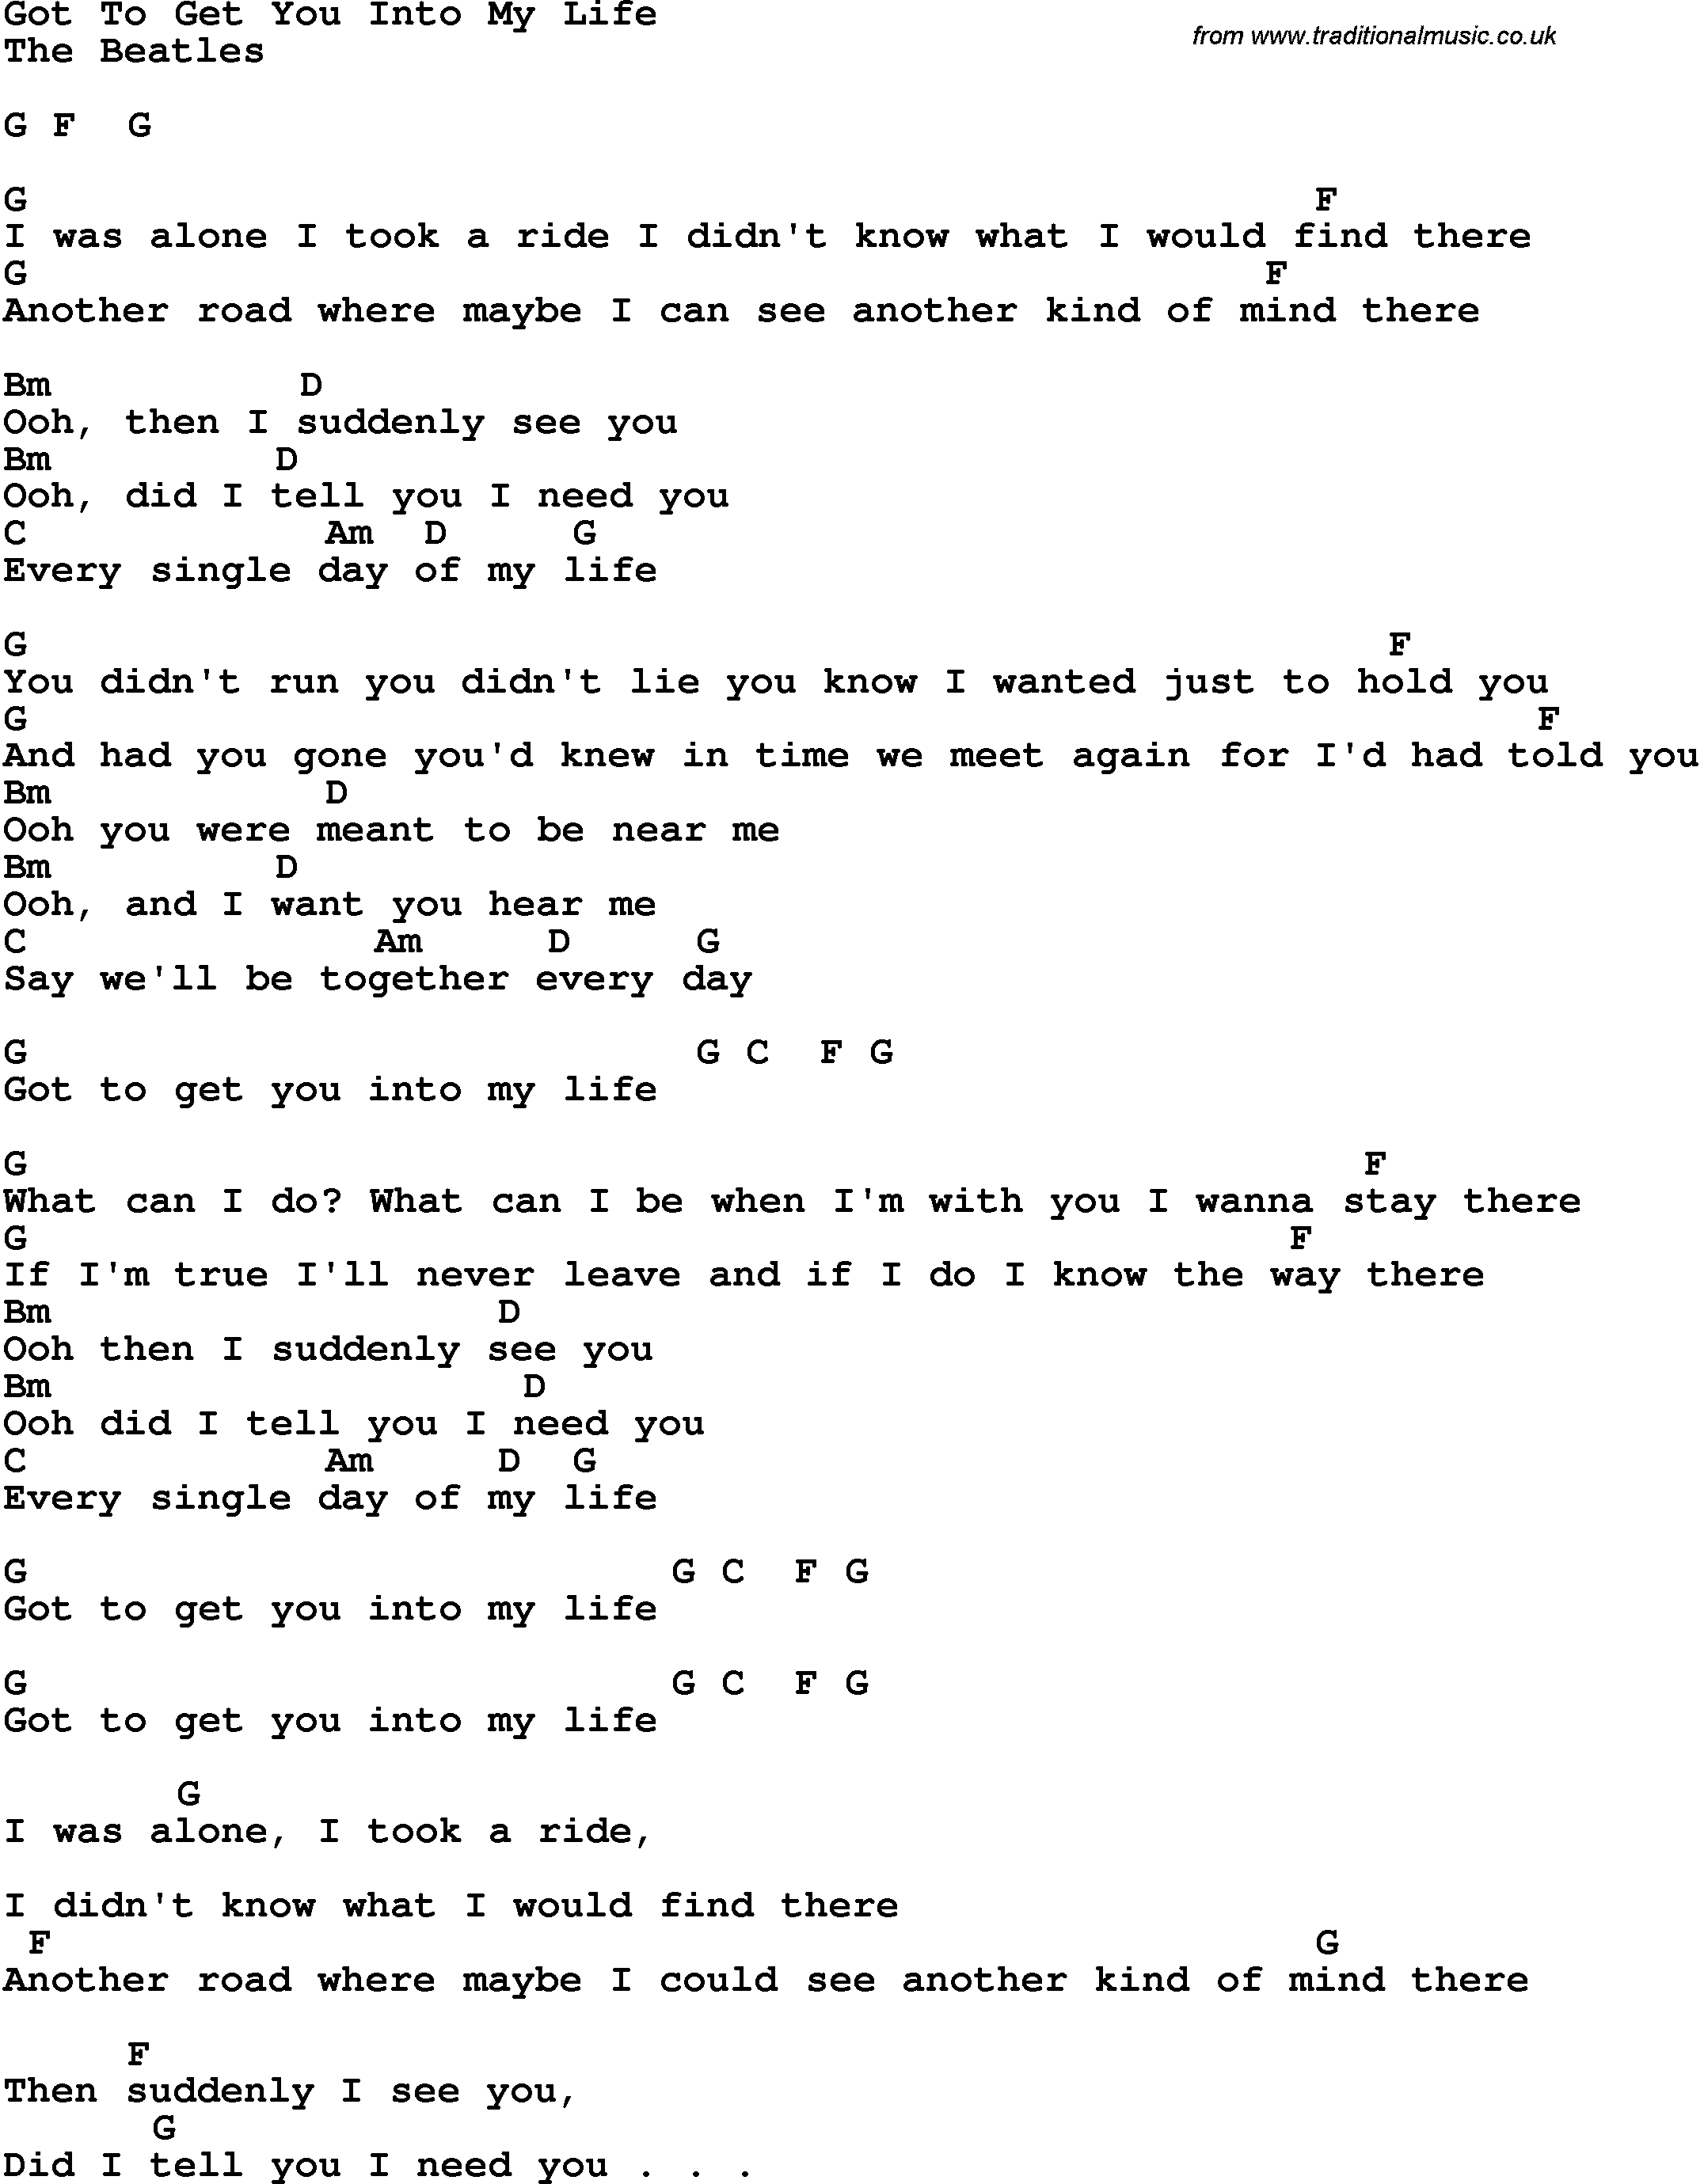 Song Lyrics with guitar chords for Got To Get You Into My Life